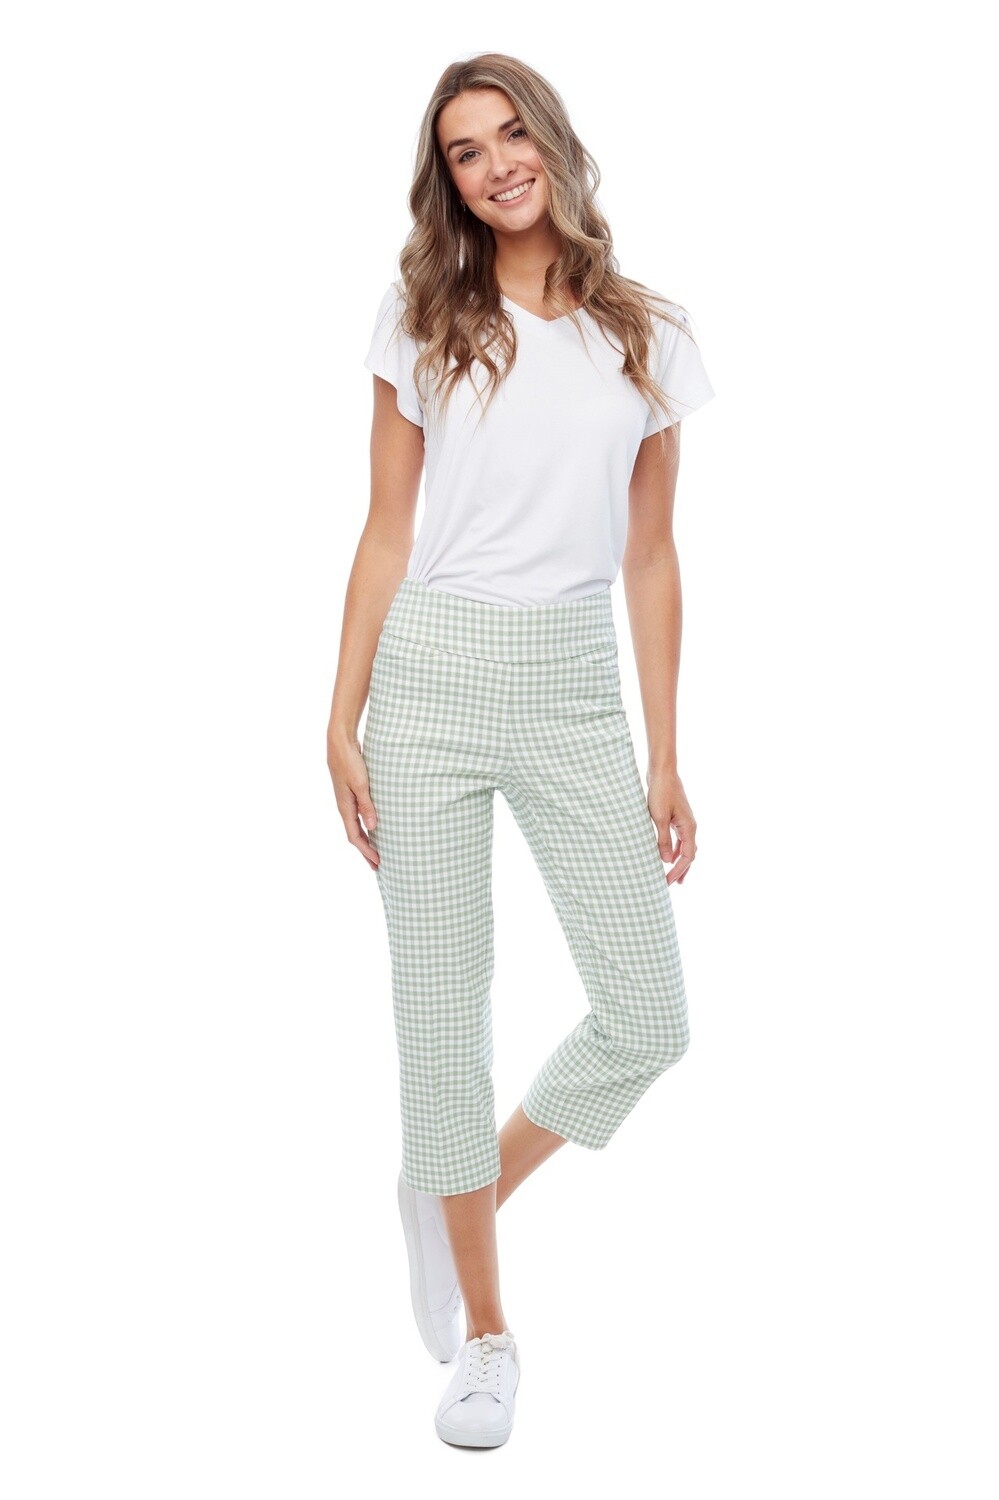 Up Gingham Cropped Pant Honeydew Gingham, Size: 8